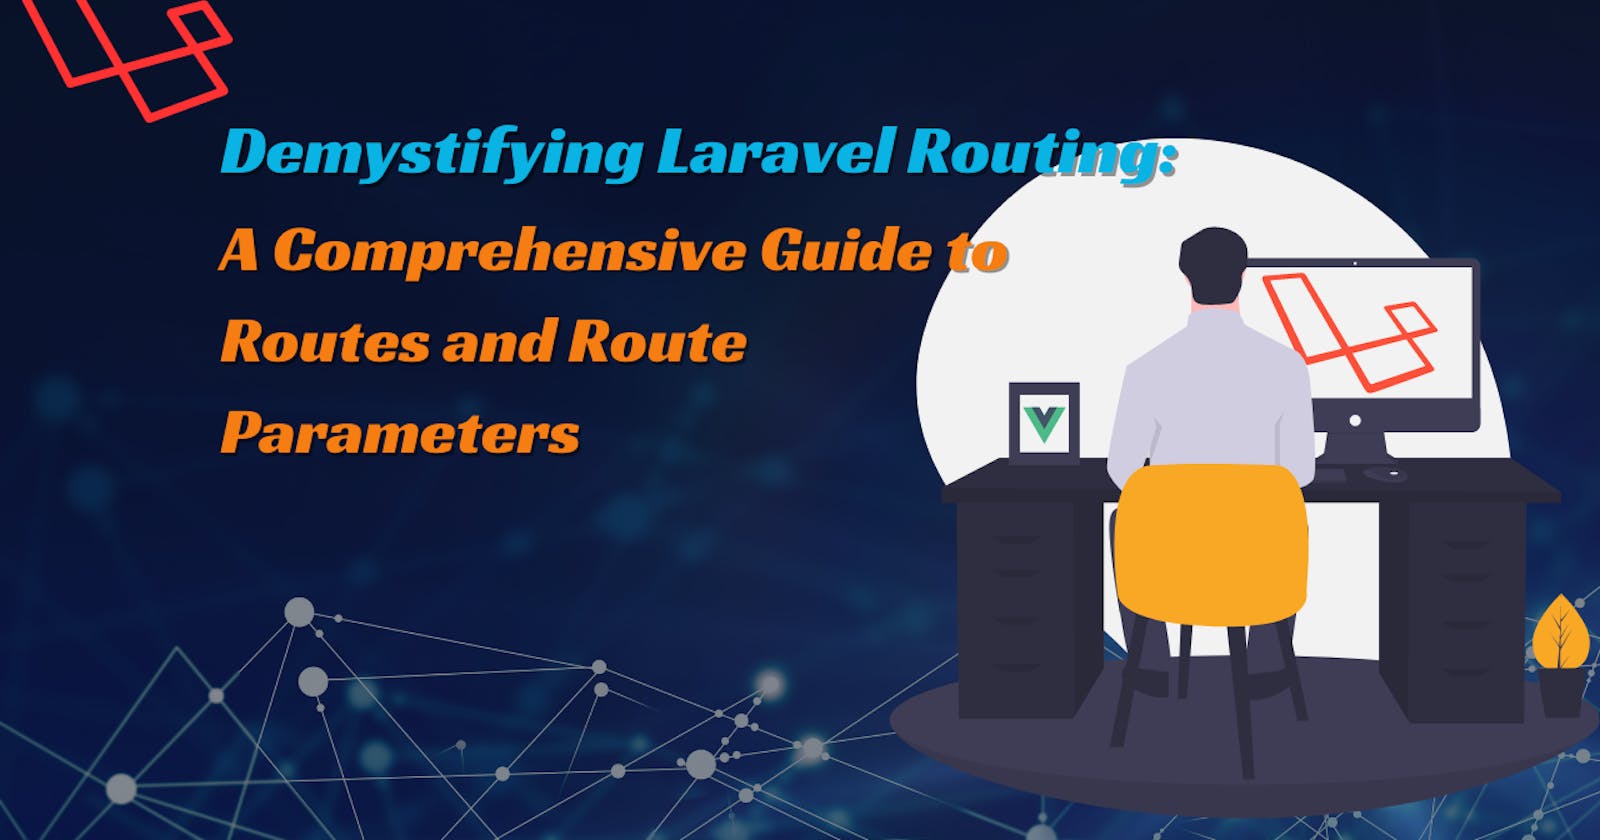 Demystifying Laravel Routing: A Comprehensive Guide to Routes and Route Parameters